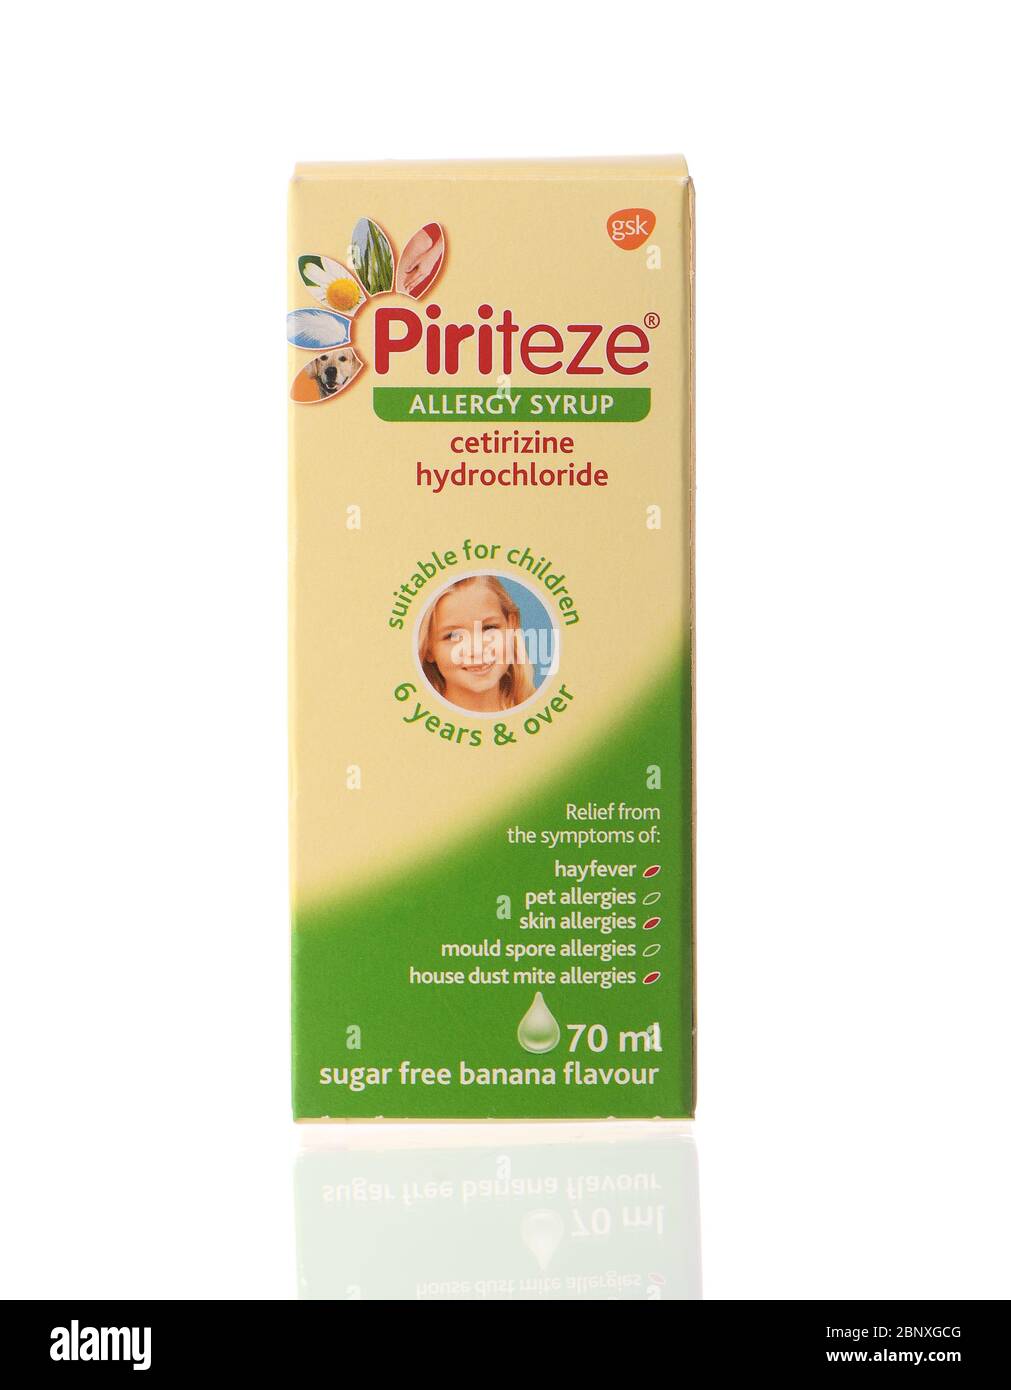 Piriteze allergy syrup packet shot in studio isolated on a white background. Stock Photo